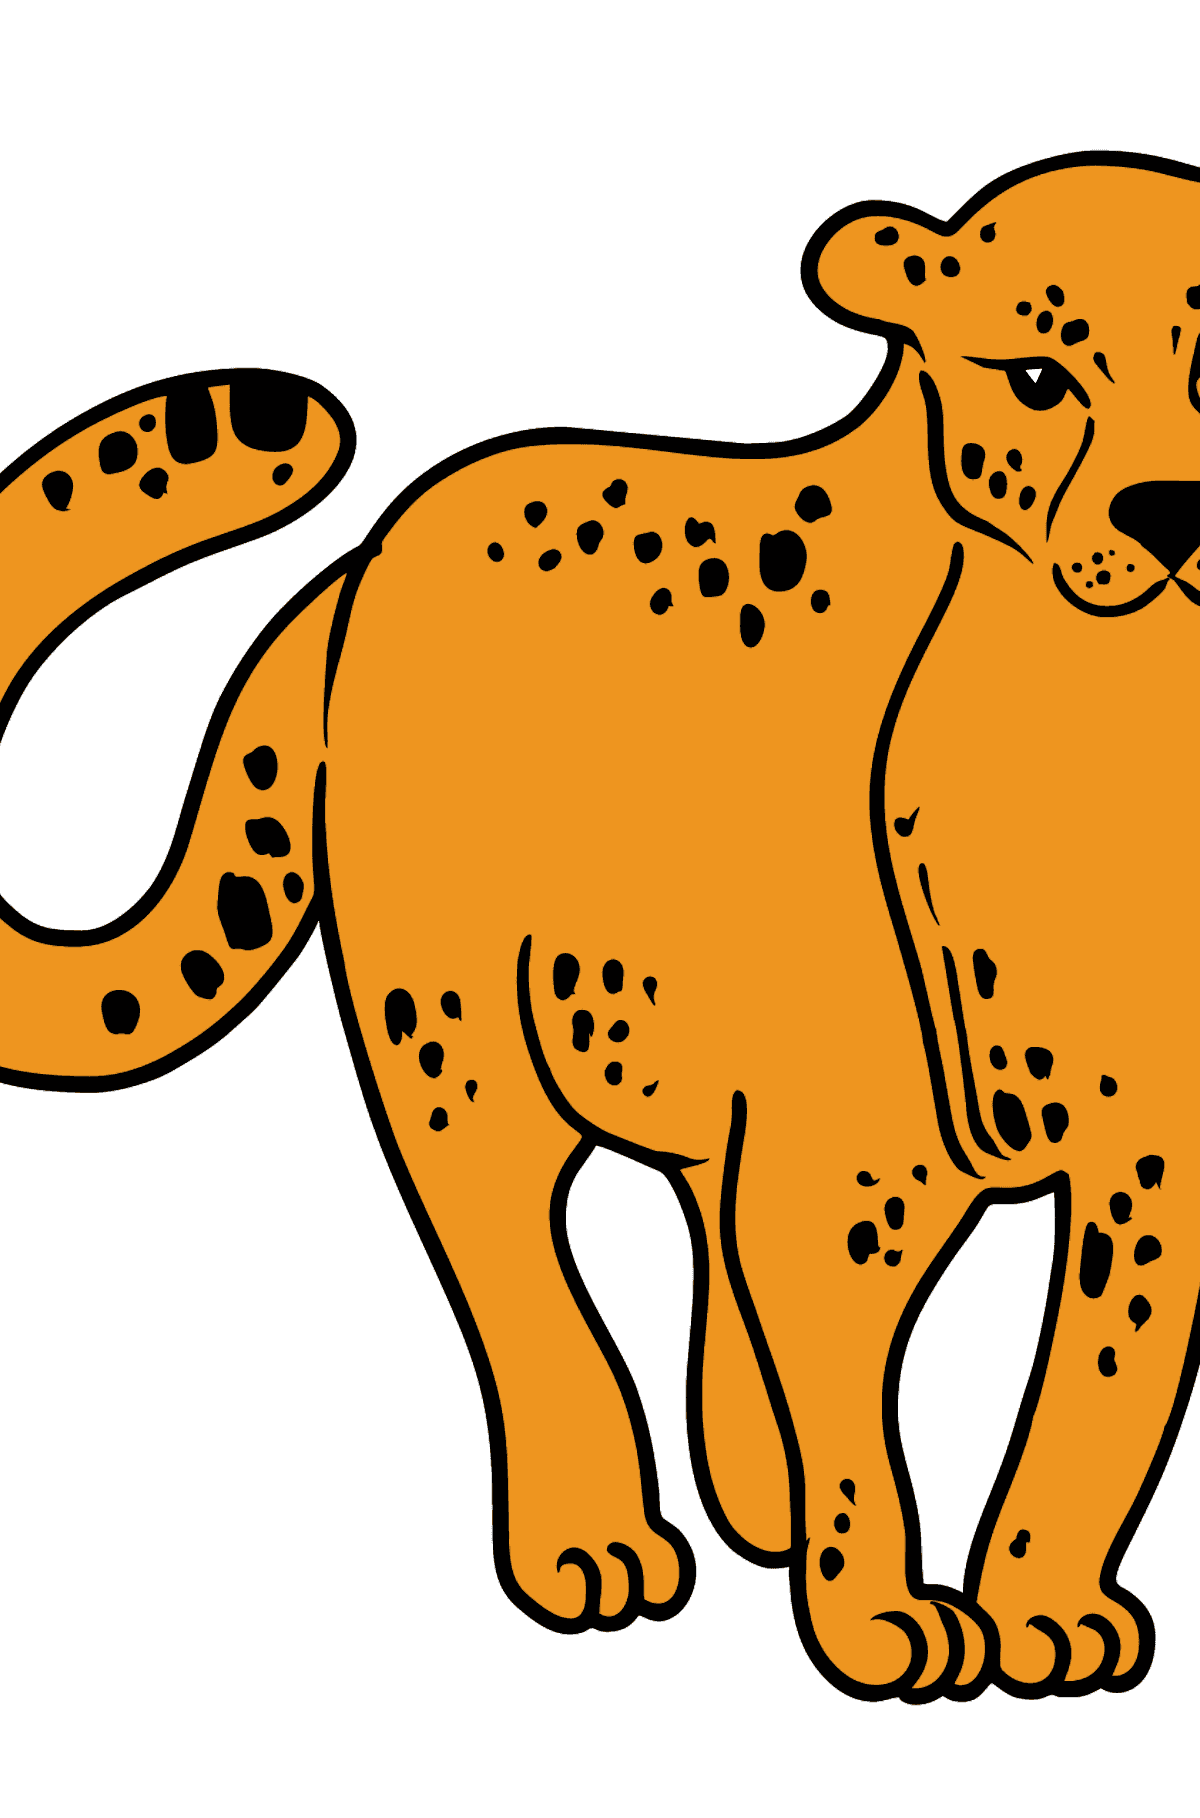 Leopard coloring page - Coloring Pages for Kids